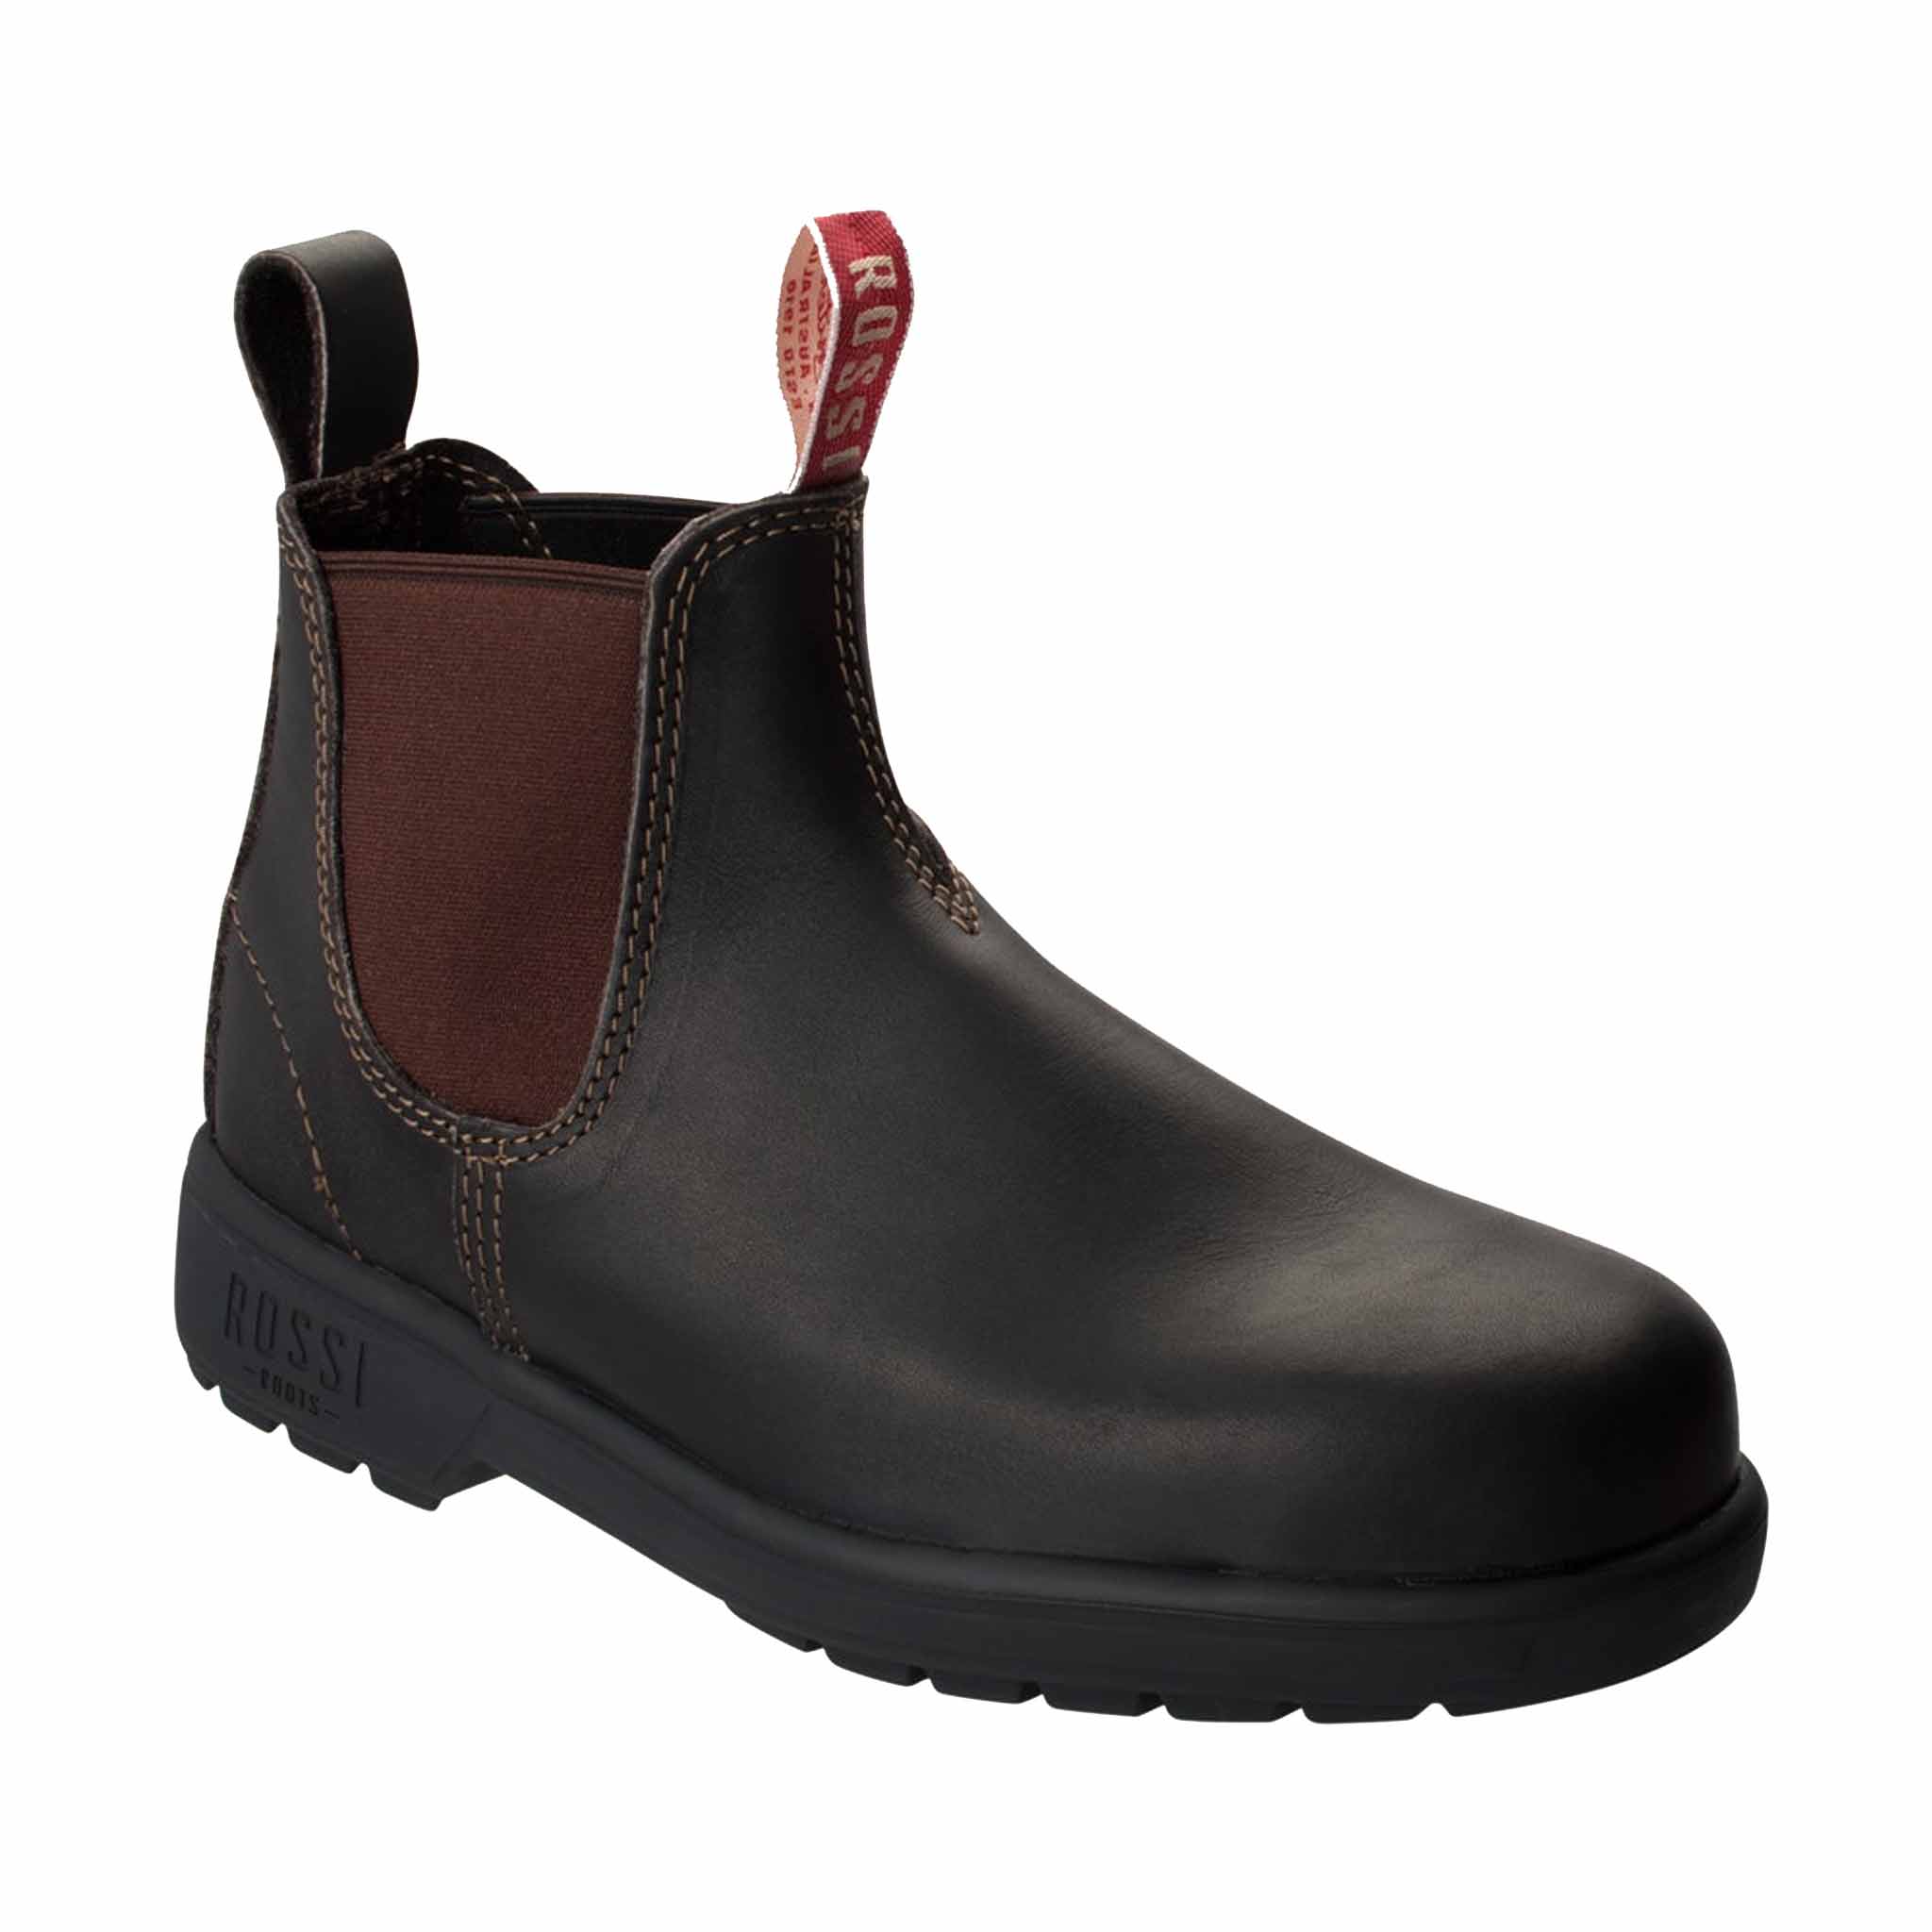 ROSSI 700 TROJAN SAFETY BOOTS | TRADIES WORKWEAR & SAFETY